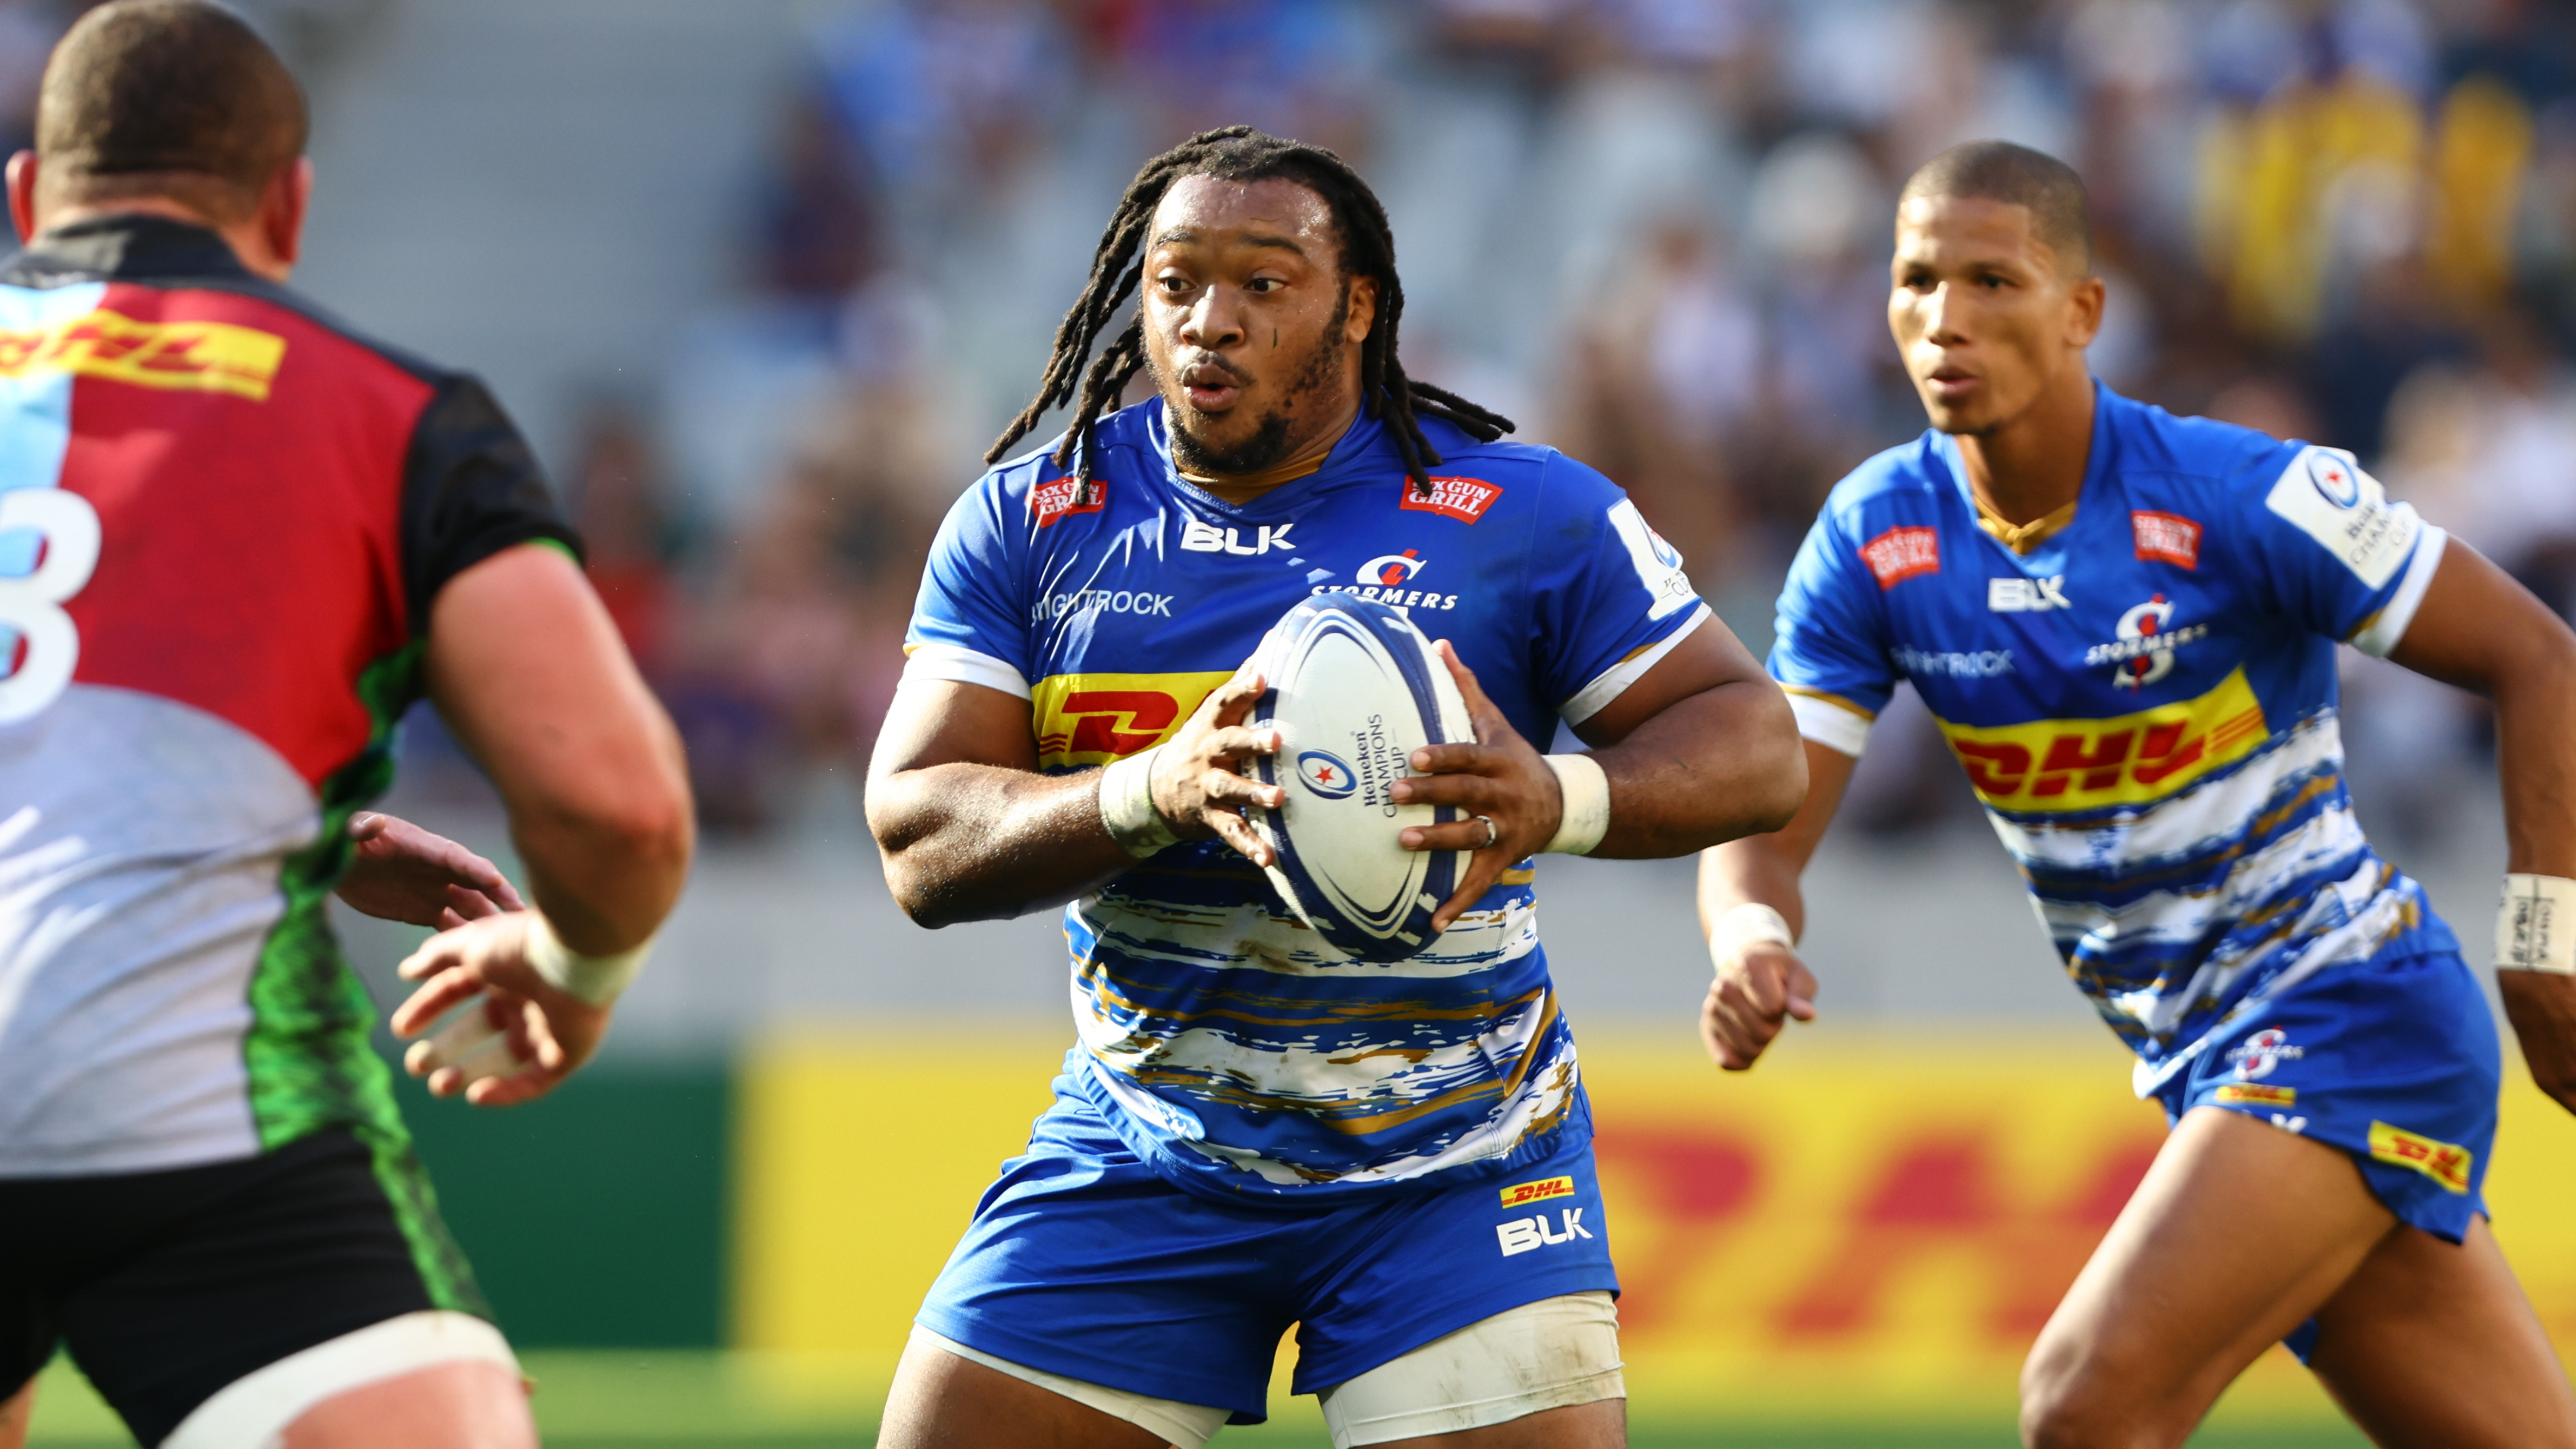 CAPE TOWN, SOUTH AFRICA - APRIL 01: Joseph Dweba of the DHL Stormers during the Heineken Champions Cup, round of 16 match between DHL Stormers and Harlequins at DHL Stadium on April 01, 2023 in Cape Town, South Africa. (Photo by EJ Langner/Gallo Images)